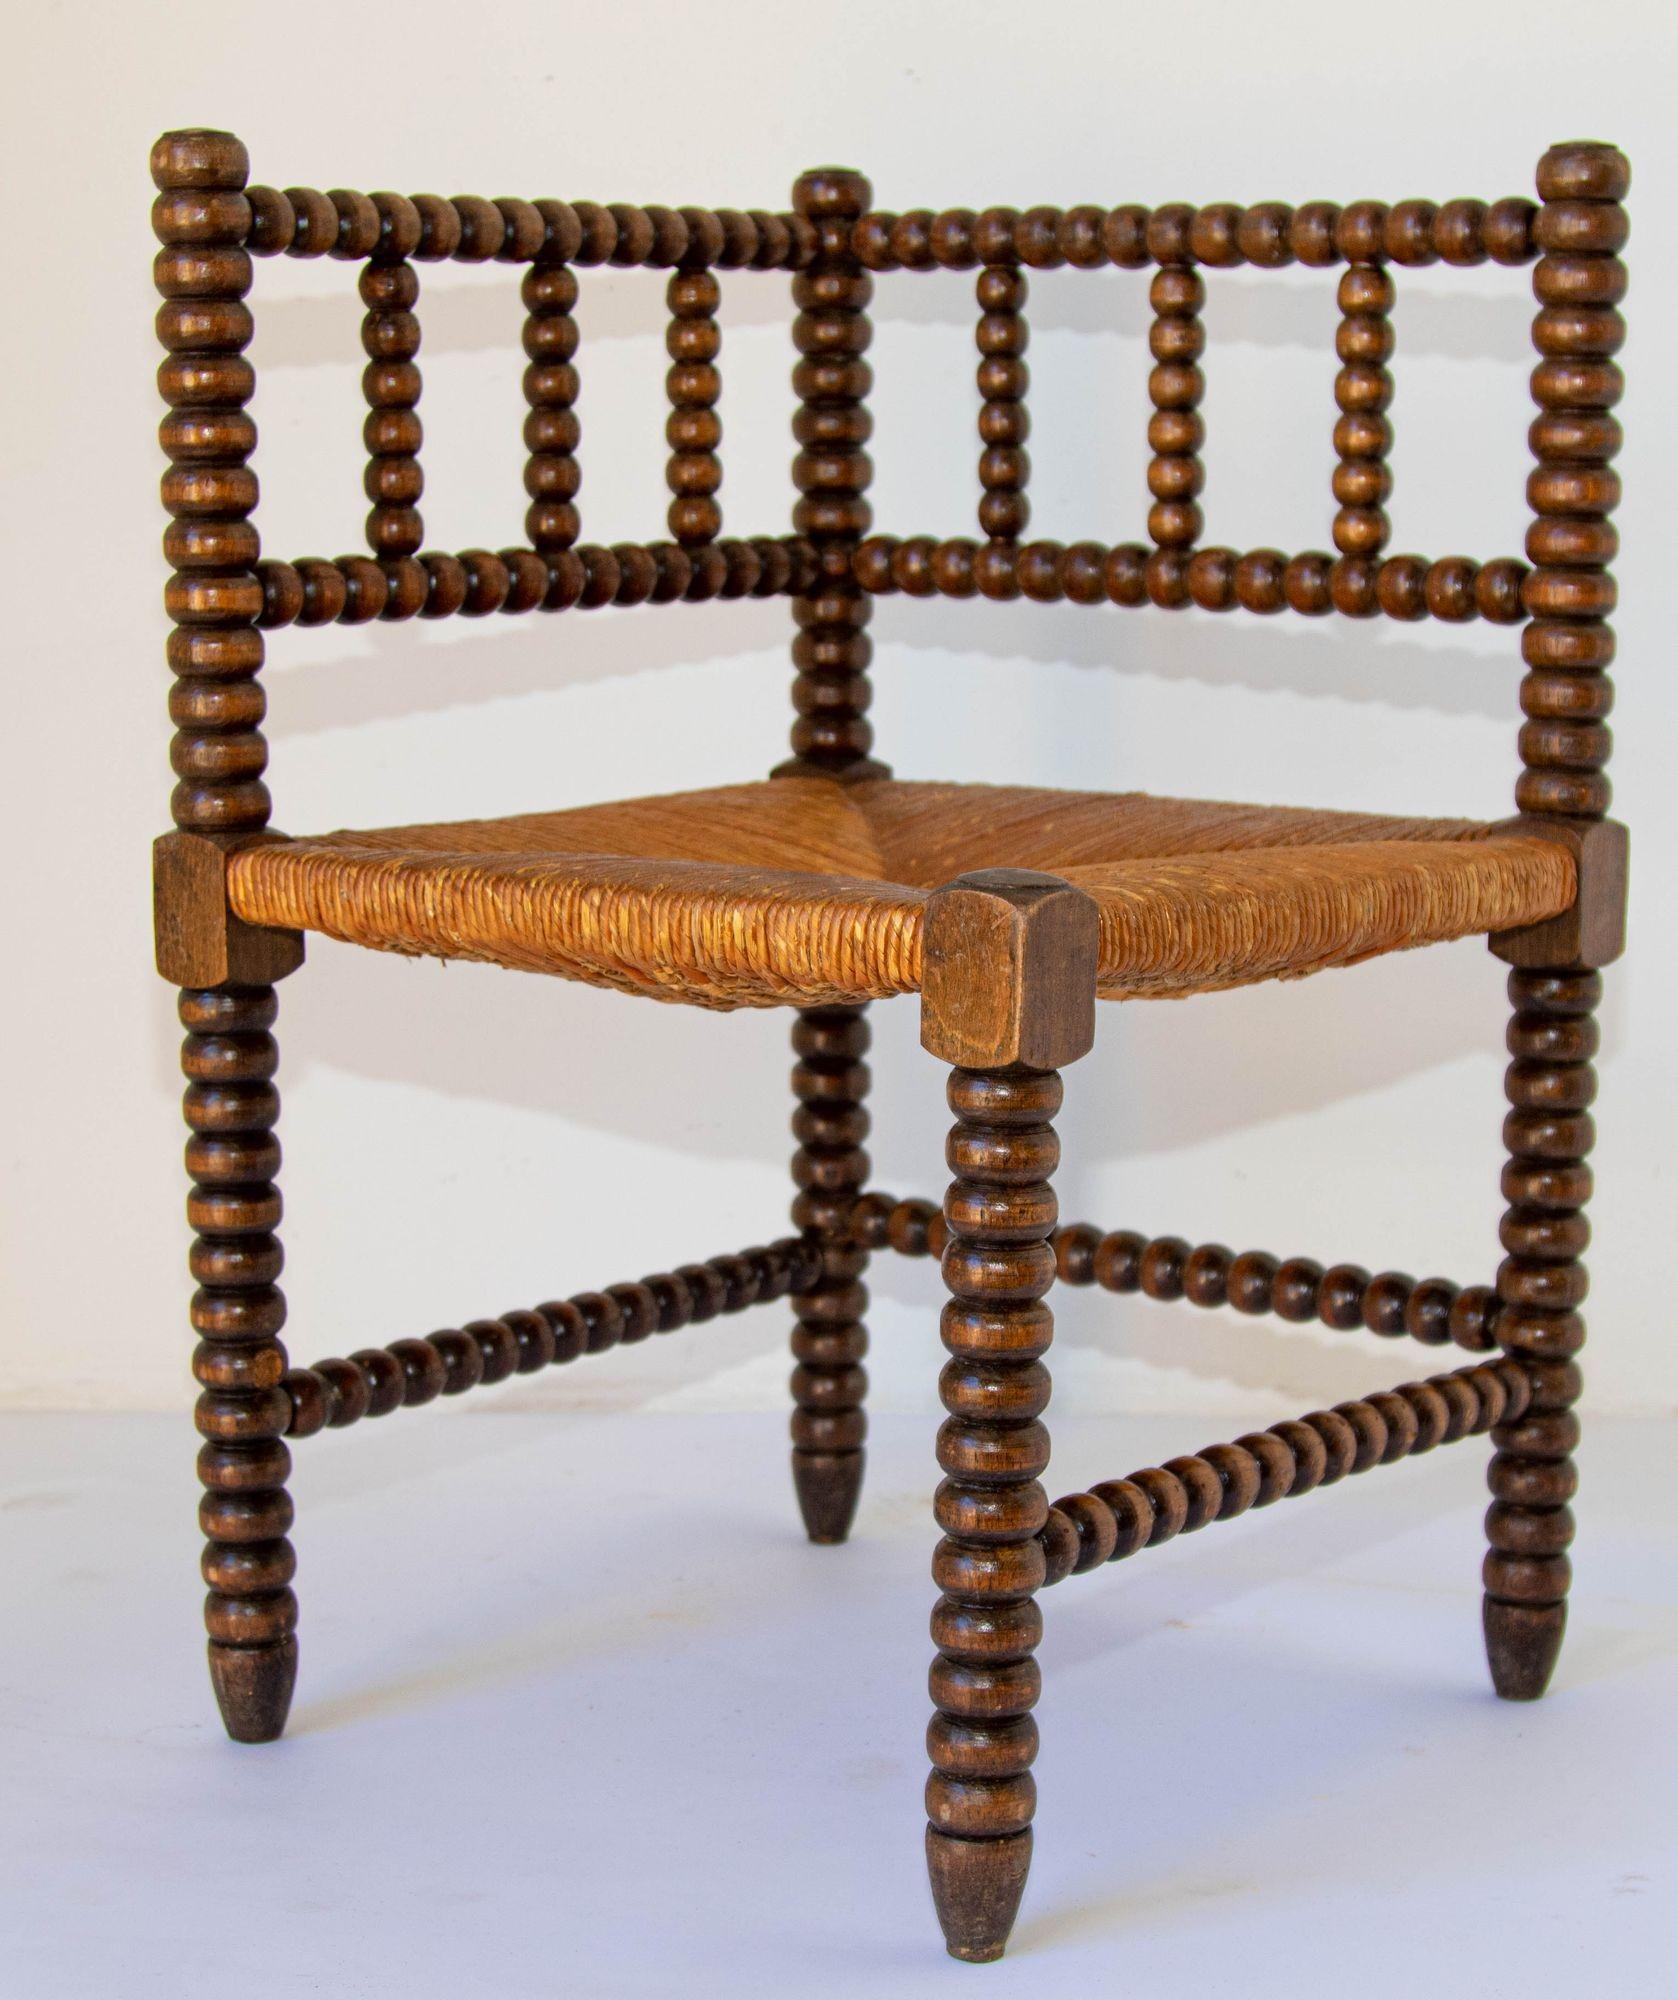 Antique 19th c. French Bobbin Rush Corner Chair.
French rush-seat corner chair, Coin du Feu. 19th Century French Provincial-style carved oak armchair with open backs and rush seat.
Antique sturdy useable chair, wood stick and ball craftsmanship